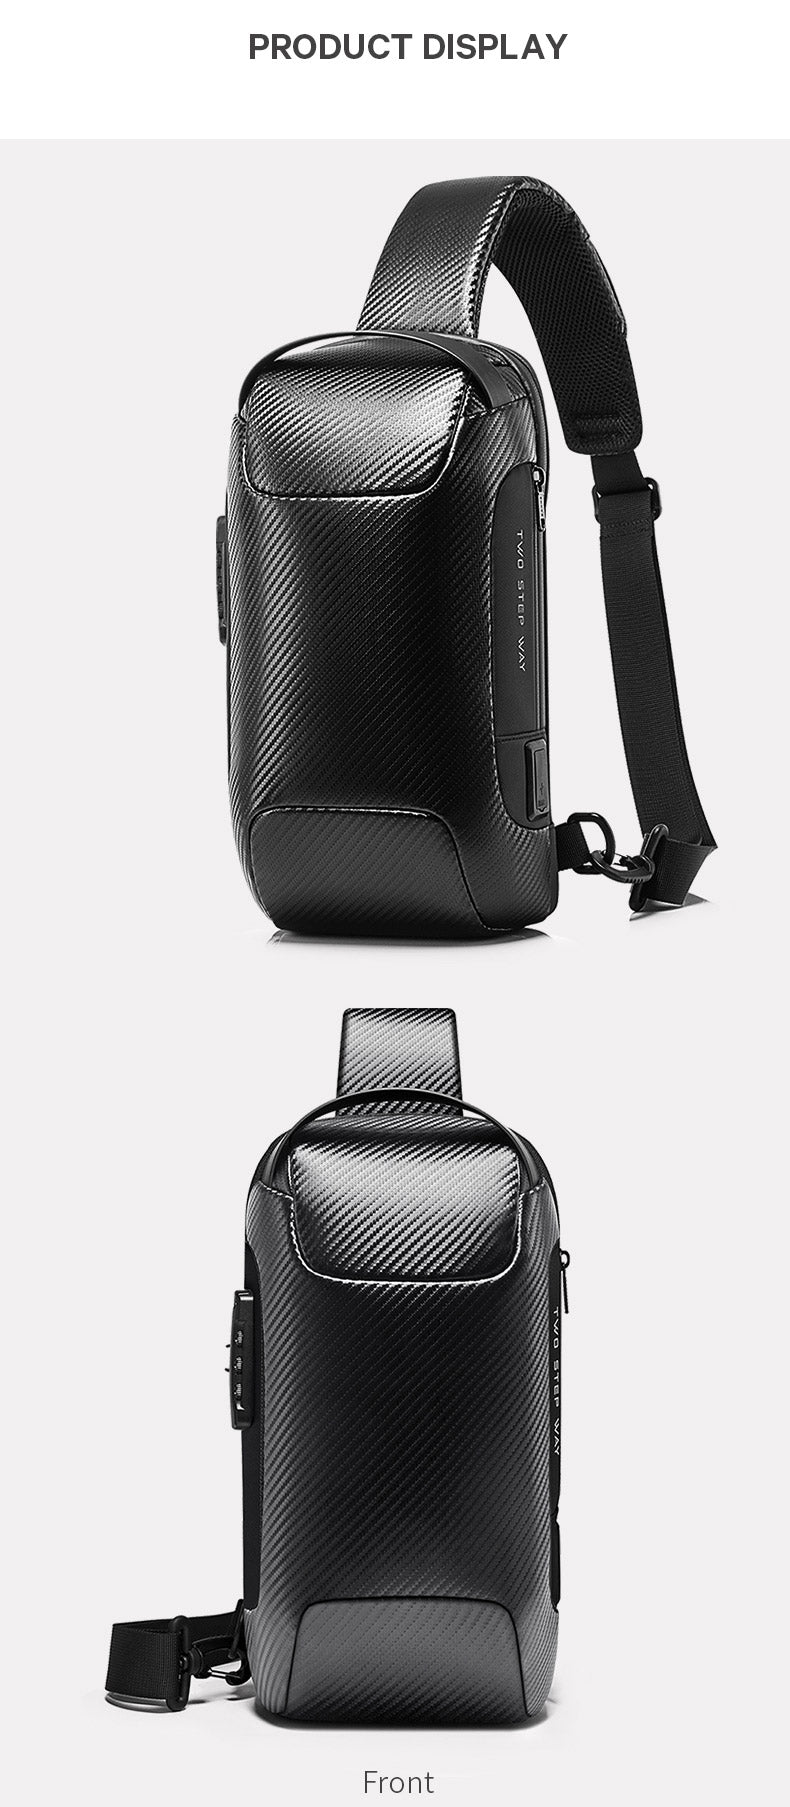 ERGONOMIC DESIGN : Two smooth zipper compartment provide super-fast access to your belongings. Adjustable strap allows you adjust length and wear bag in the front or back, and stays in place comfortably even while running. Perfectly fit your body.